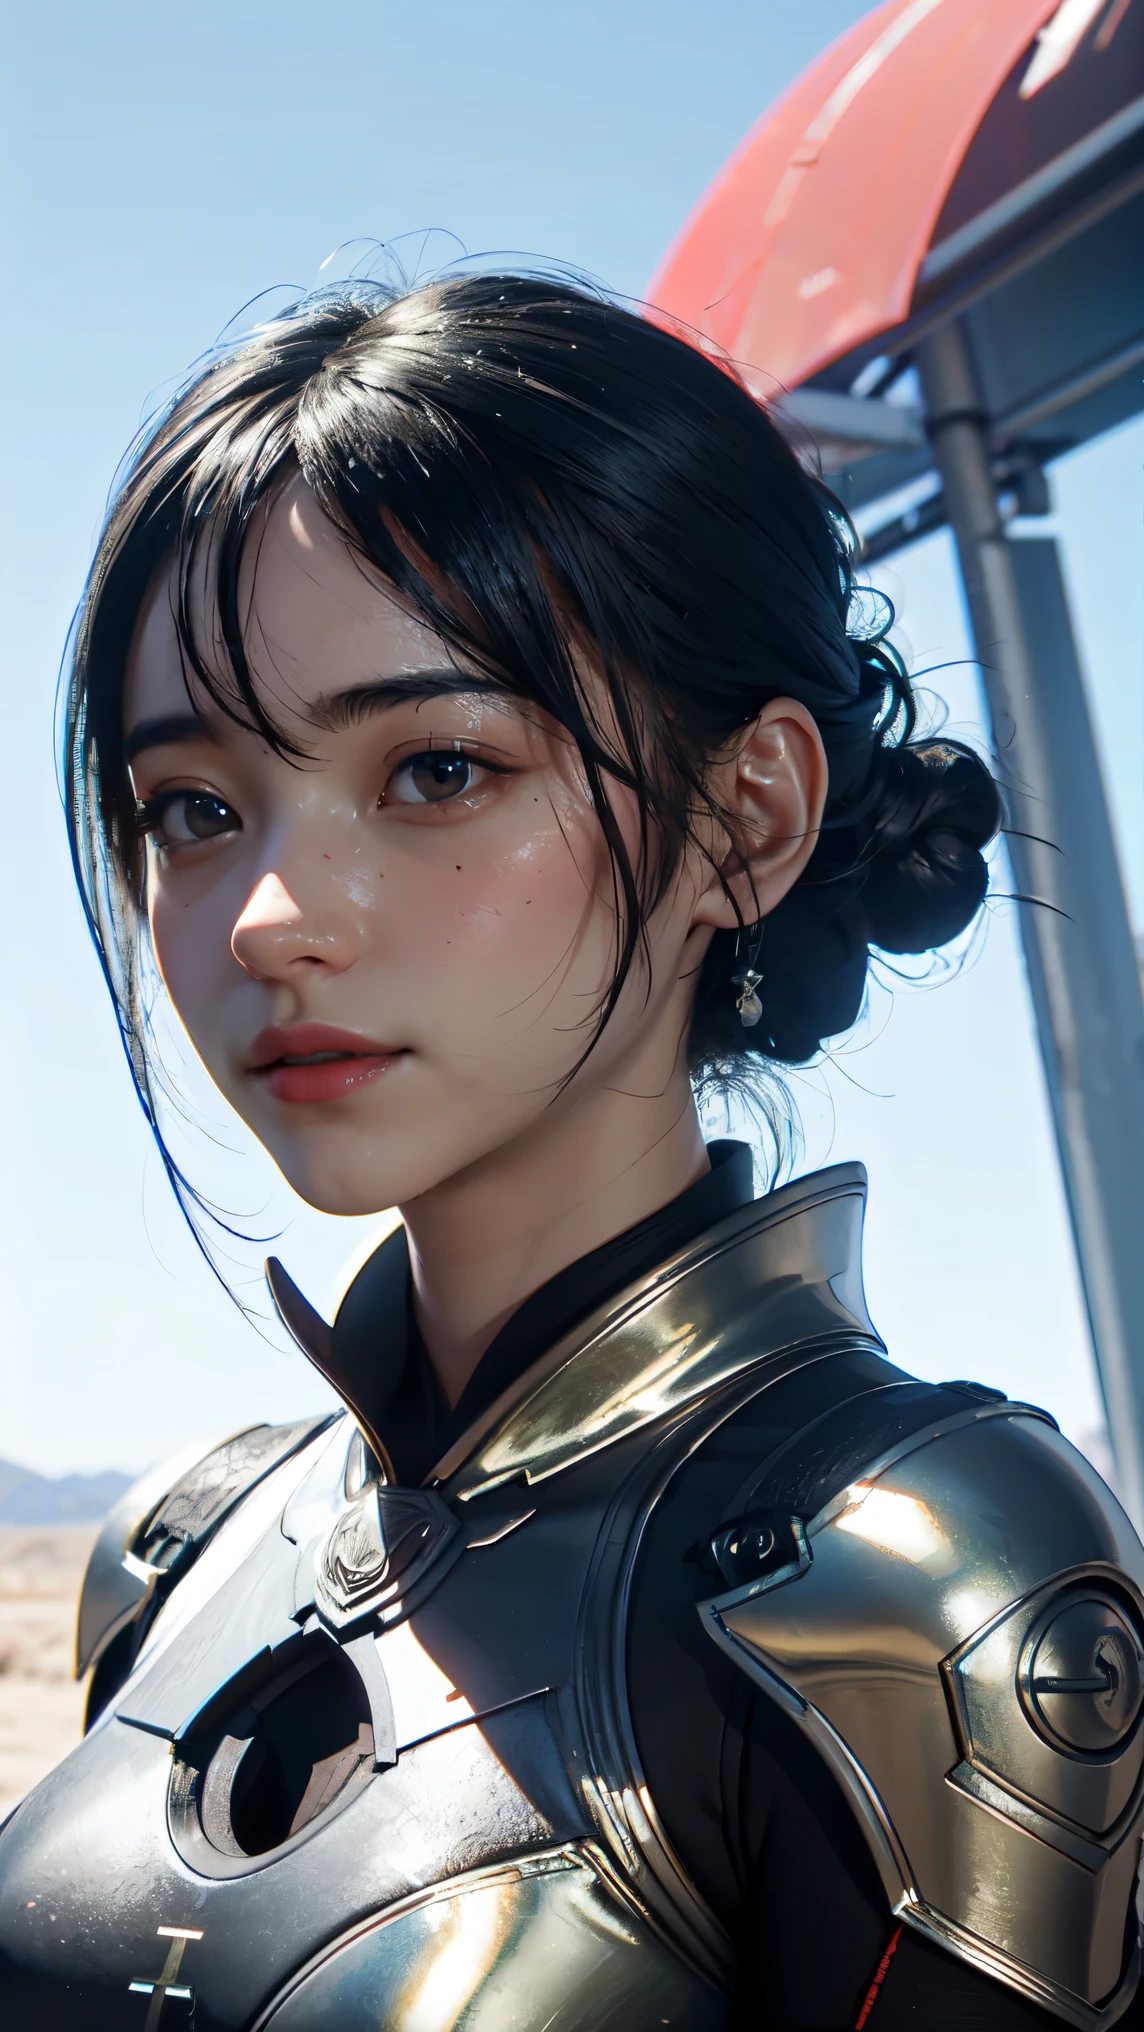 Game art，The best picture quality，Highest resolution，8K，(A bust photograph)，(A bust:1.5)，(Portrait)，(Head close-up)，(Rule of thirds)，Unreal Engine 5 rendering works， (The Girl of the Future)，(Female Warrior)， 20-year-old girl，An eye rich in detail，(Big breasts)，Elegant and noble，indifferent，brave， (Future style combat suit combining the characteristics of ancient armor，Ancient runes of light，Combat accessories with rich detailetallic luster)，Future police，cyberpunk characters， photo poses，simple background，Movie lights，Ray tracing，Game CG，((3D Unreal Engine))，OC rendering reflection pattern